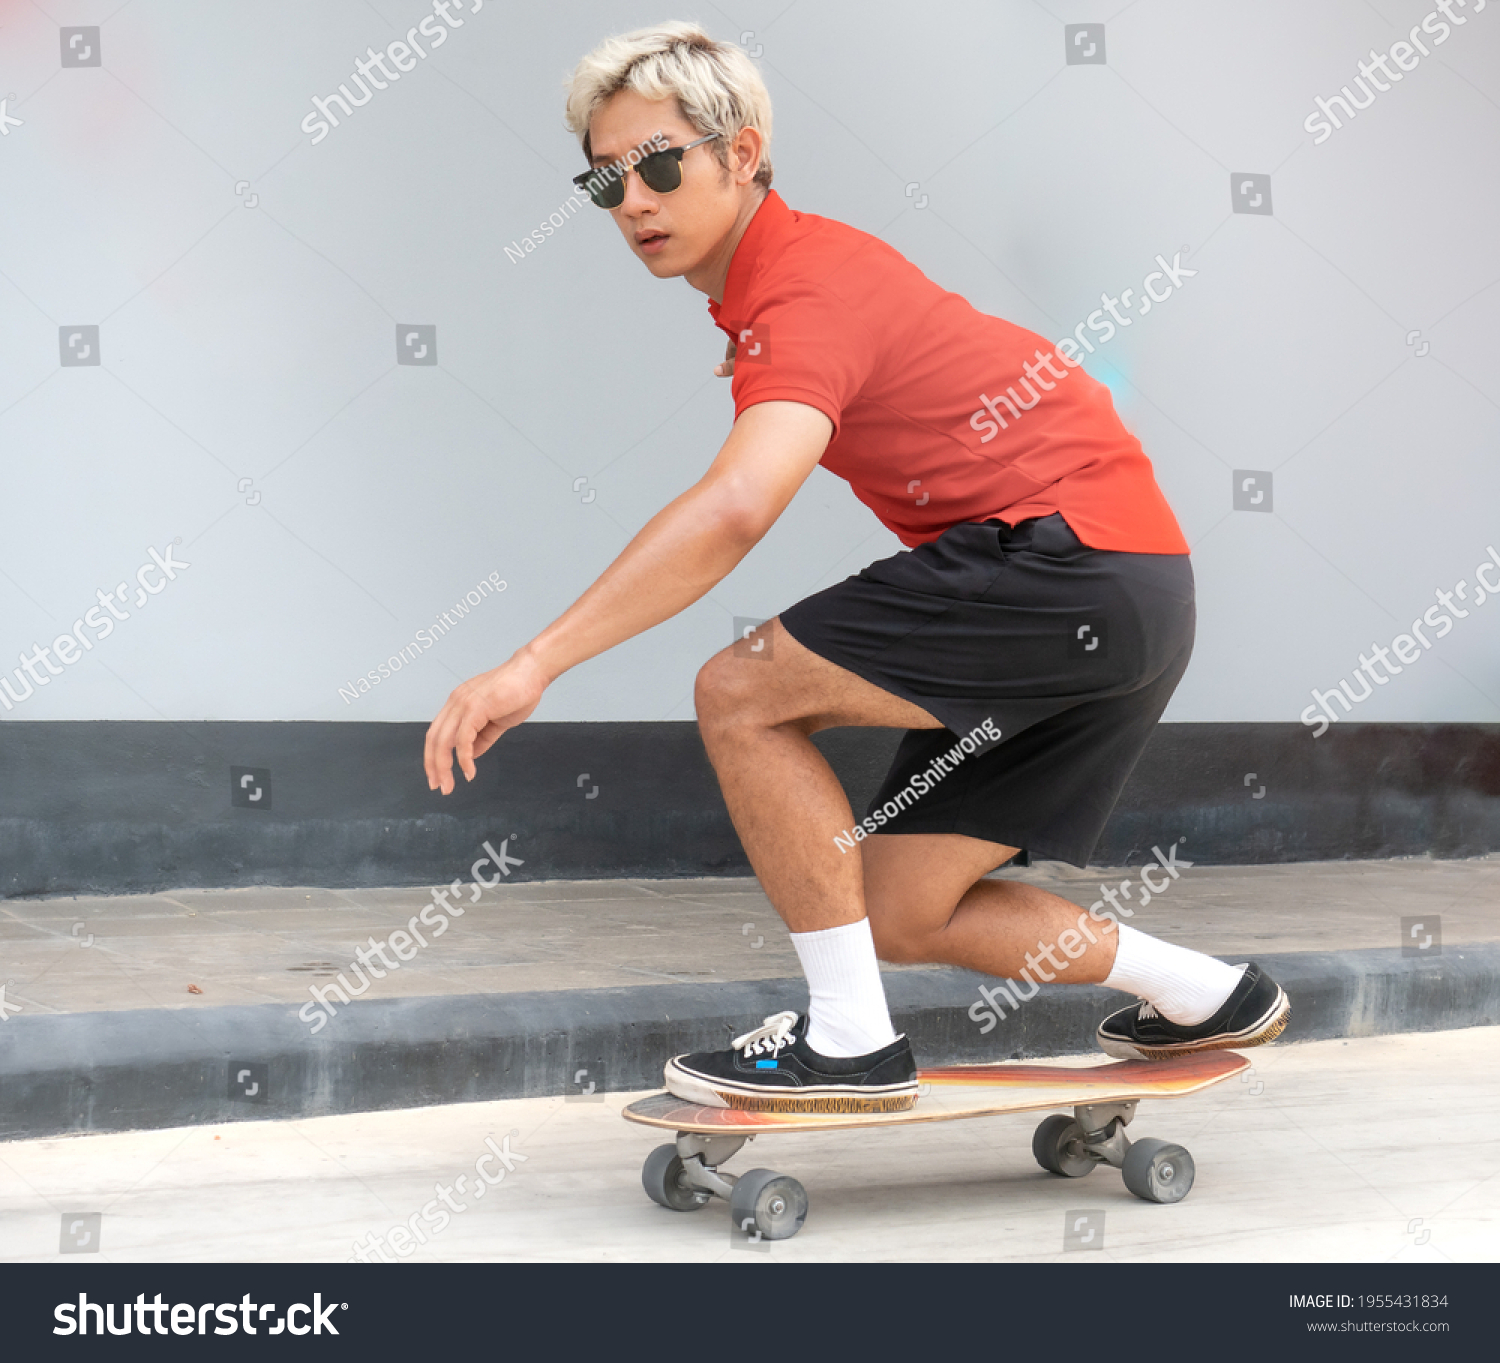 Young asian man riding skateboard on a city street. Portrait of male in t-shirt and black short pants exercise surf skate near sidewalk in urban. Trendy outdoor extreme sport recreation in Asia.  #1955431834